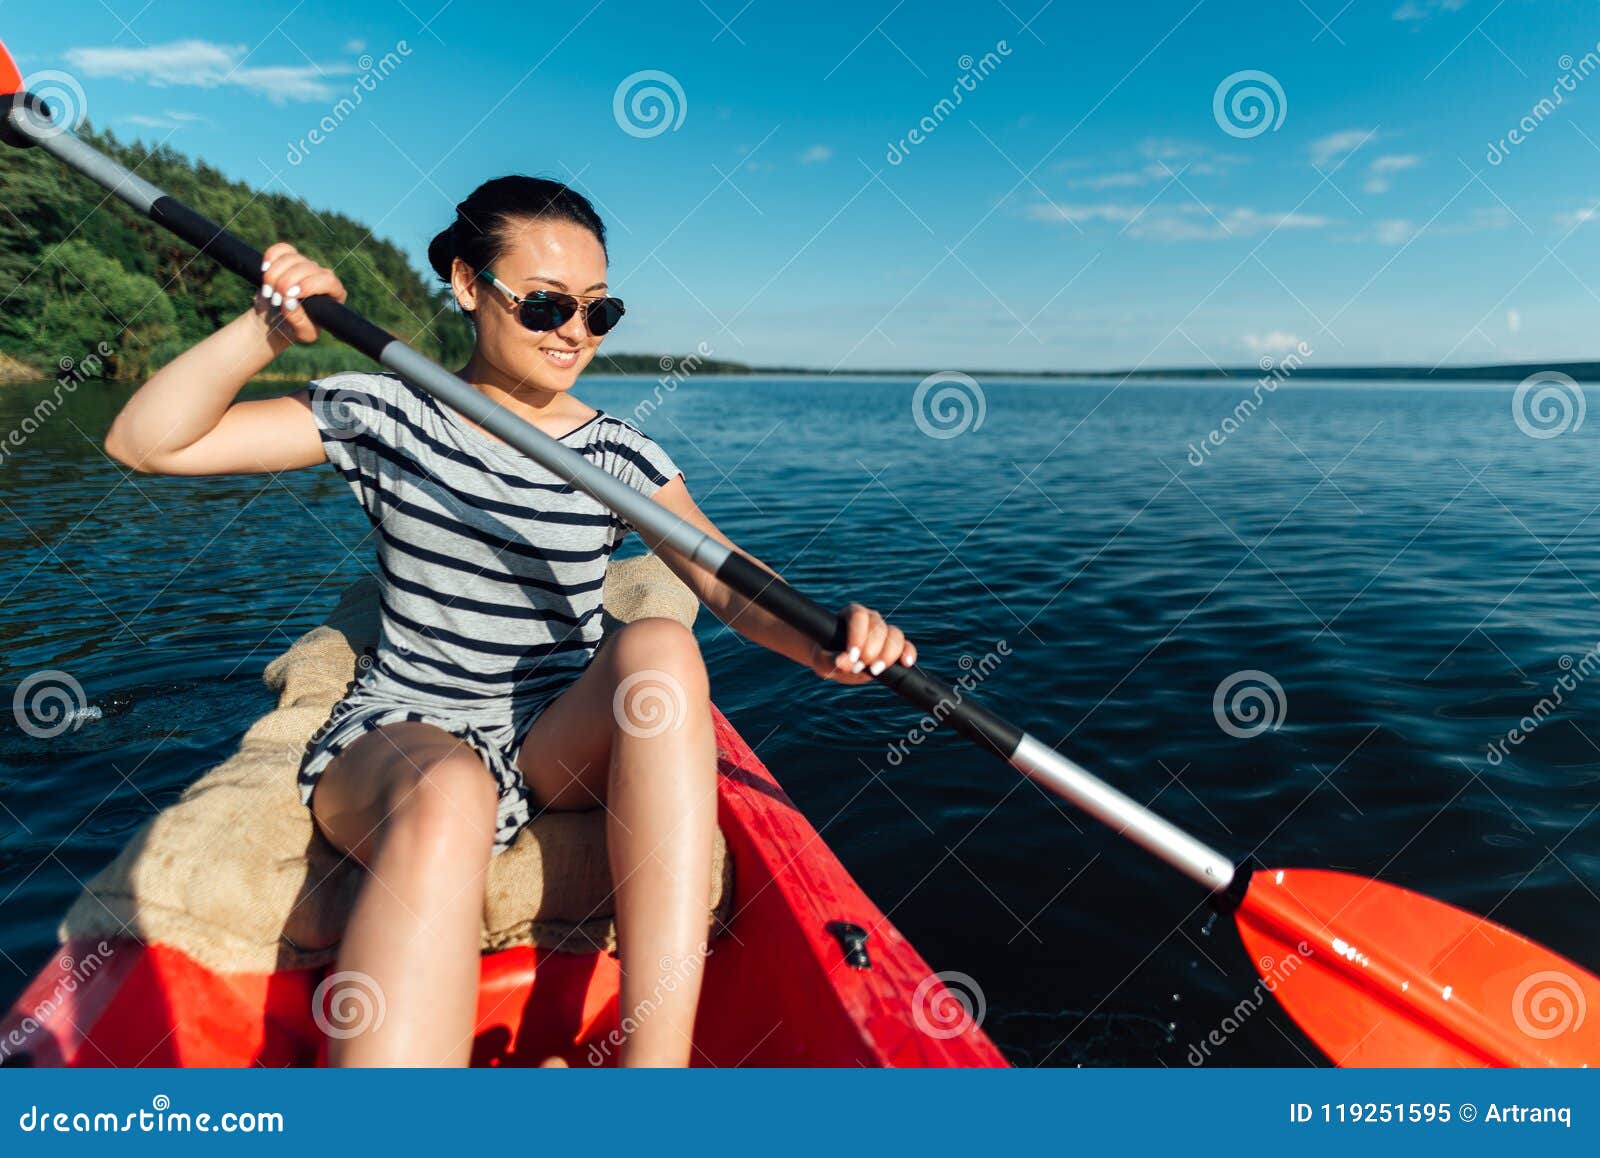 Girl Sails on a Kayak, Paddles with a Paddle. Stock Image - Image of ...